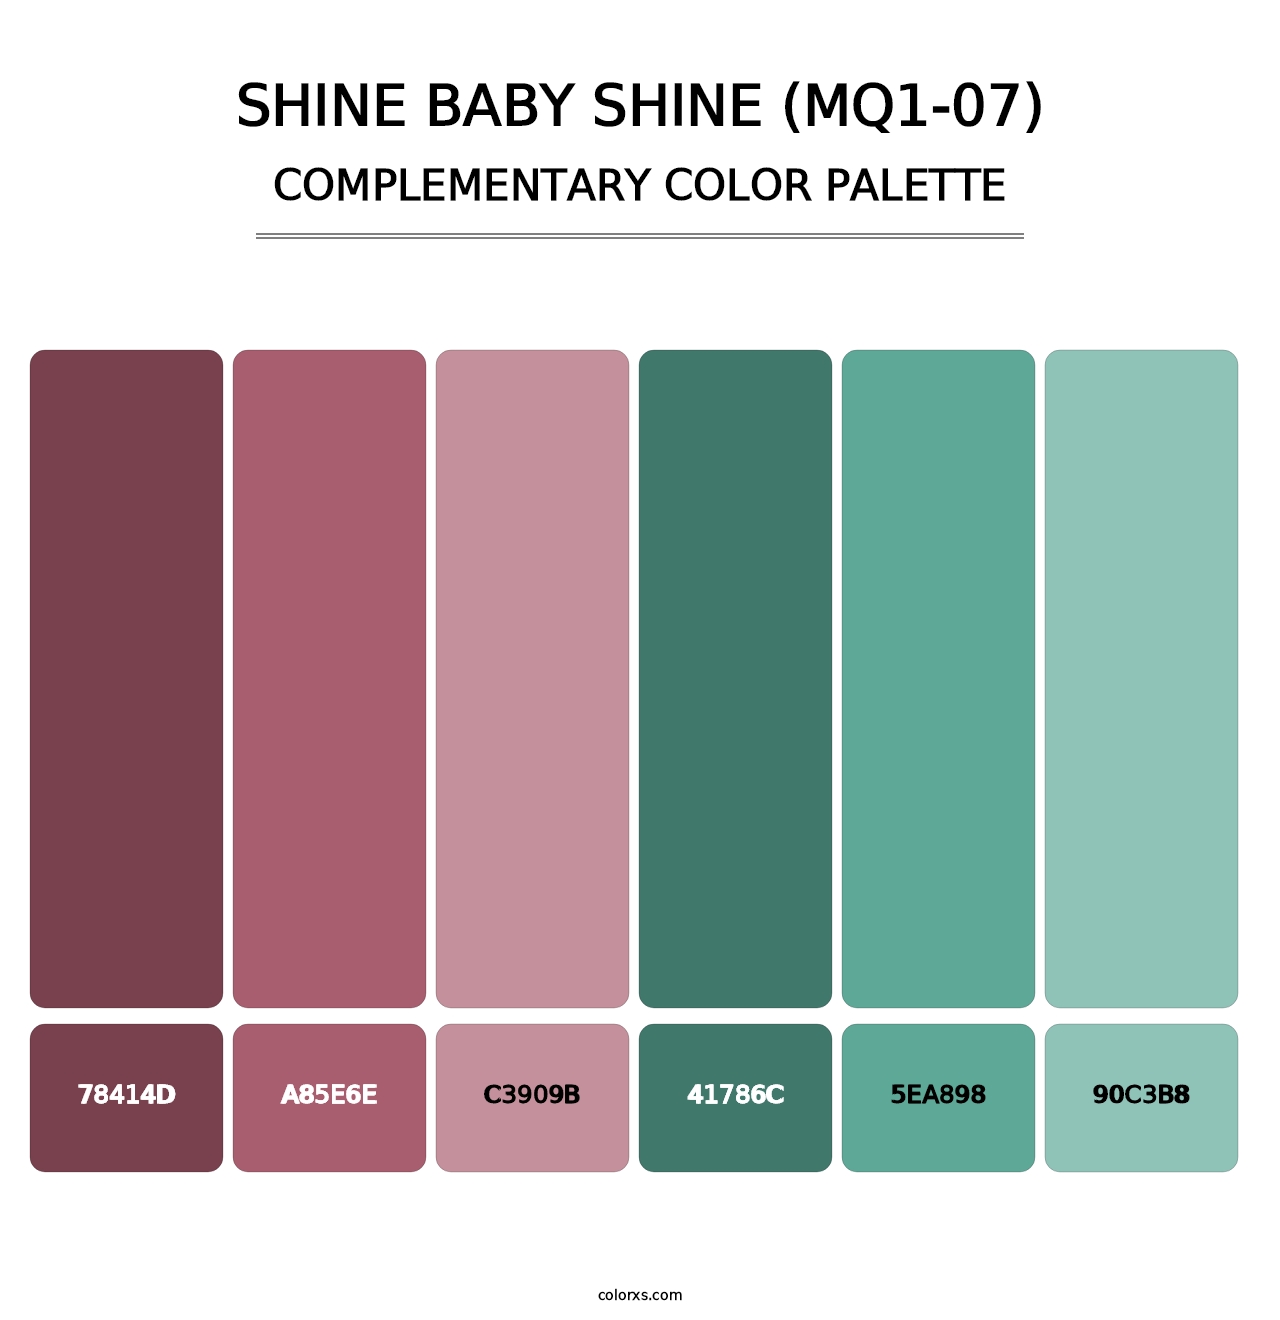 Shine Baby Shine (MQ1-07) - Complementary Color Palette